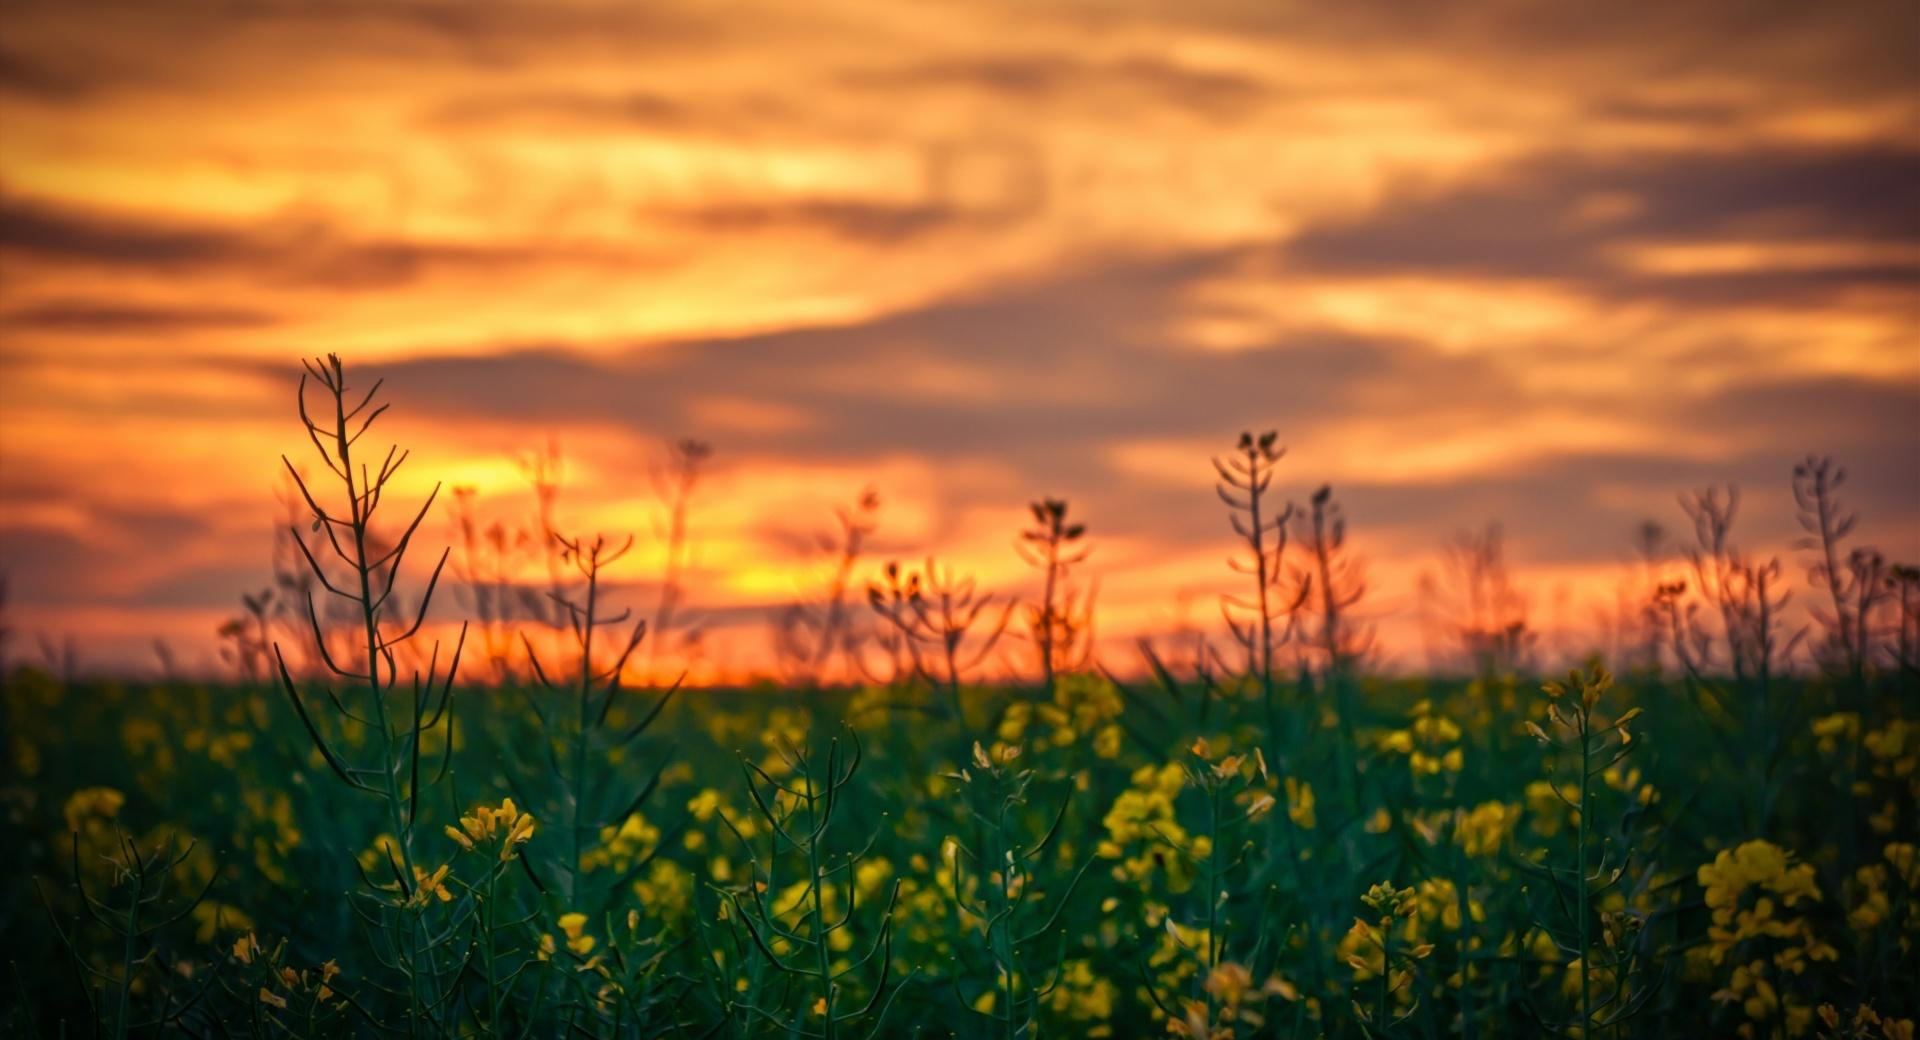 Sunset Sky Over Canola Field wallpapers HD quality